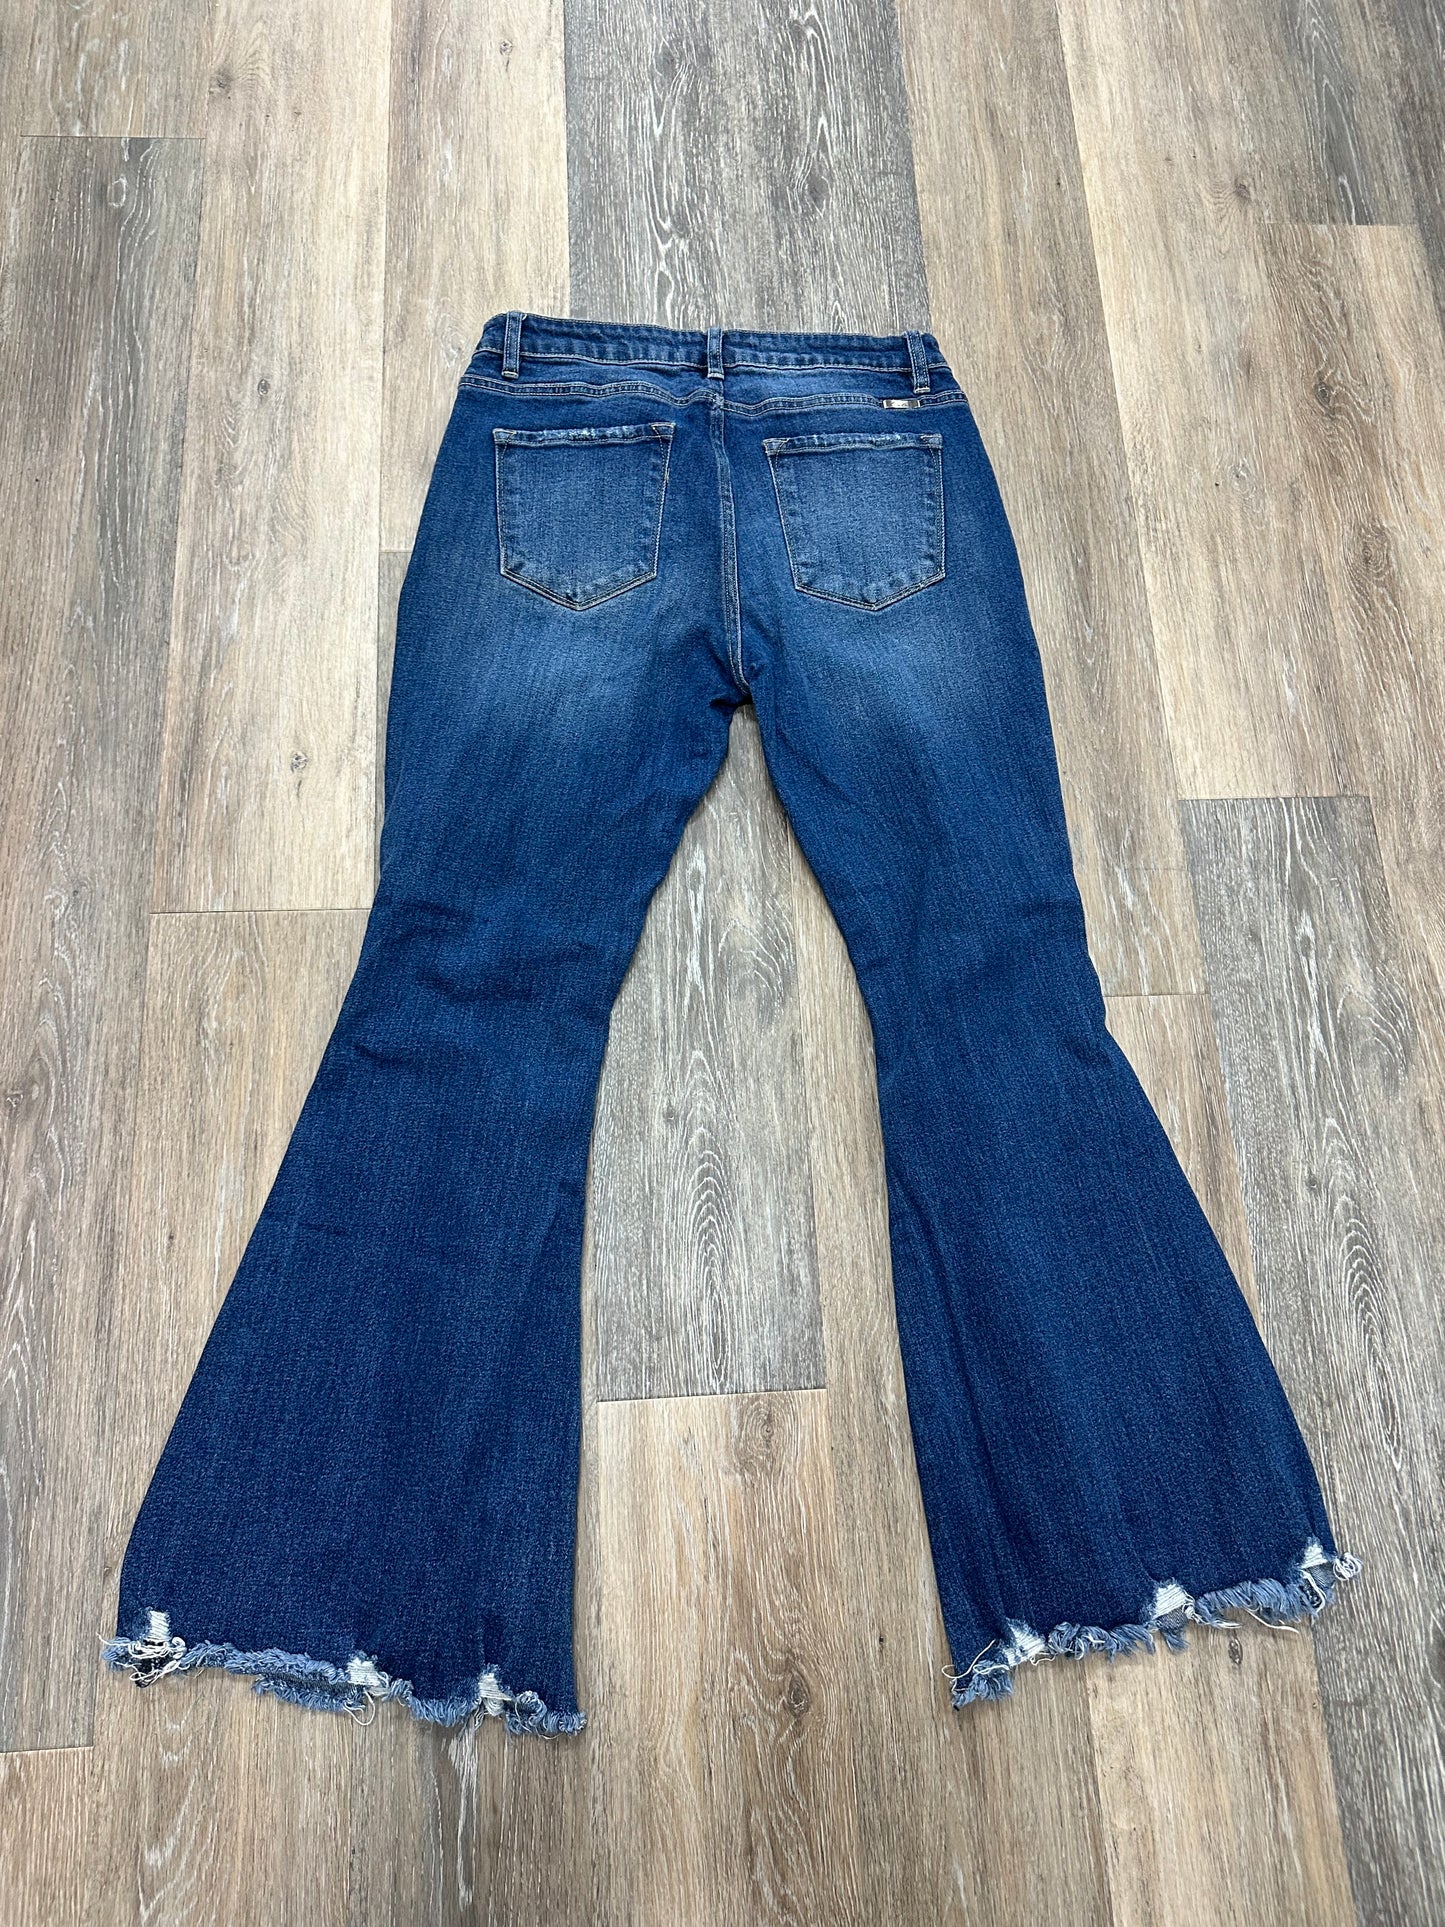 Jeans Flared By Kancan  Size: 8